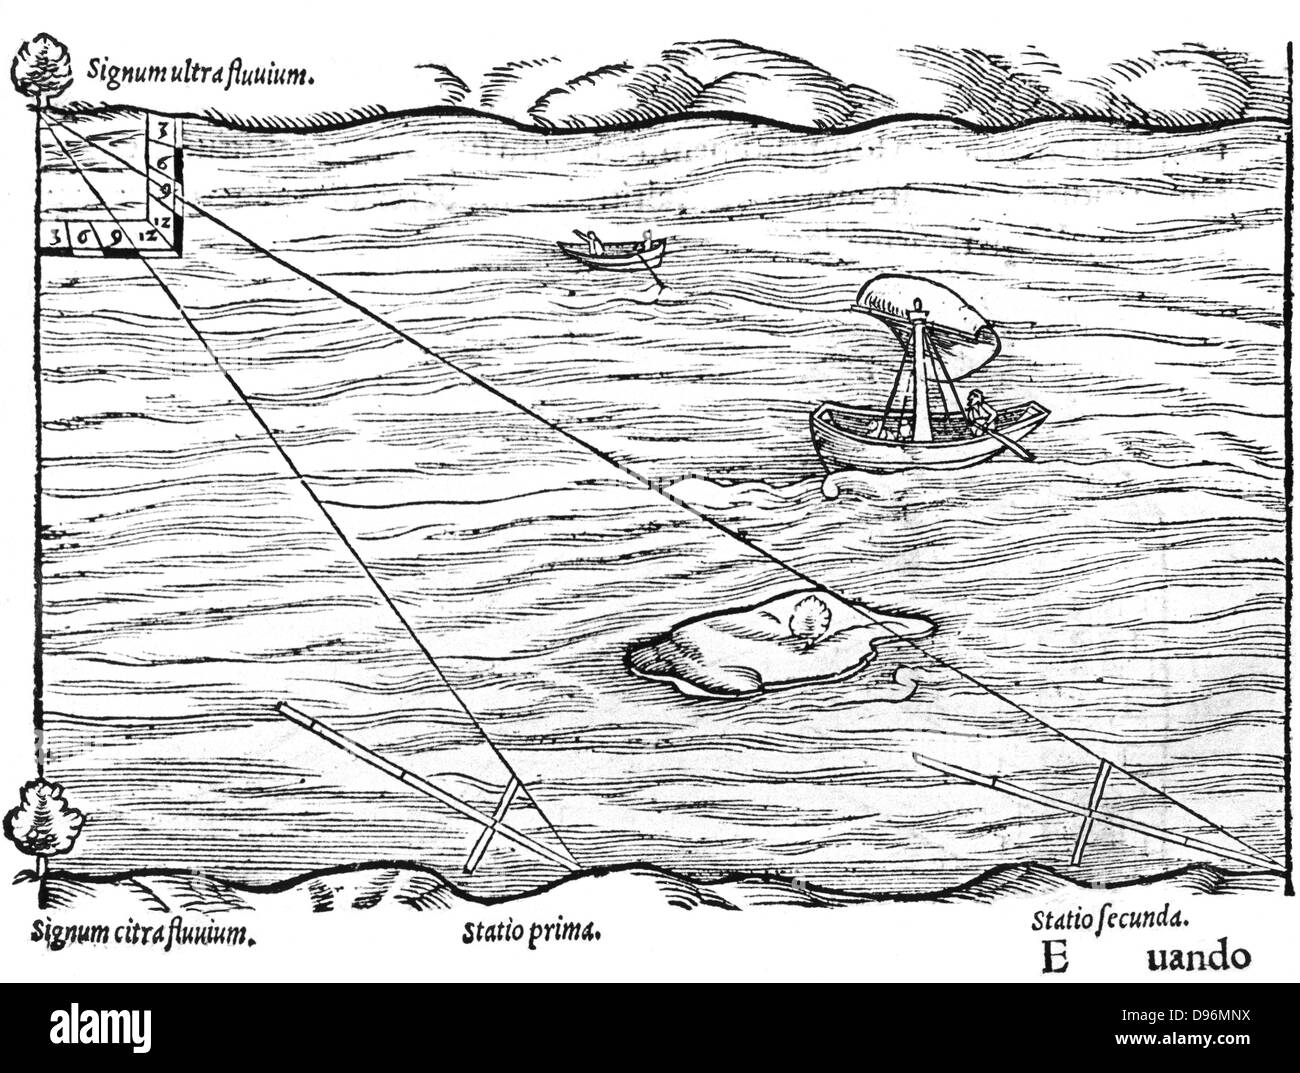 Cross-staffs used for surveying: in this case for measuring the width of a river by triangulation. From Sebastian Munster 'Rudimenta Mathematica', Basle, 1551.  Woodcut Stock Photo